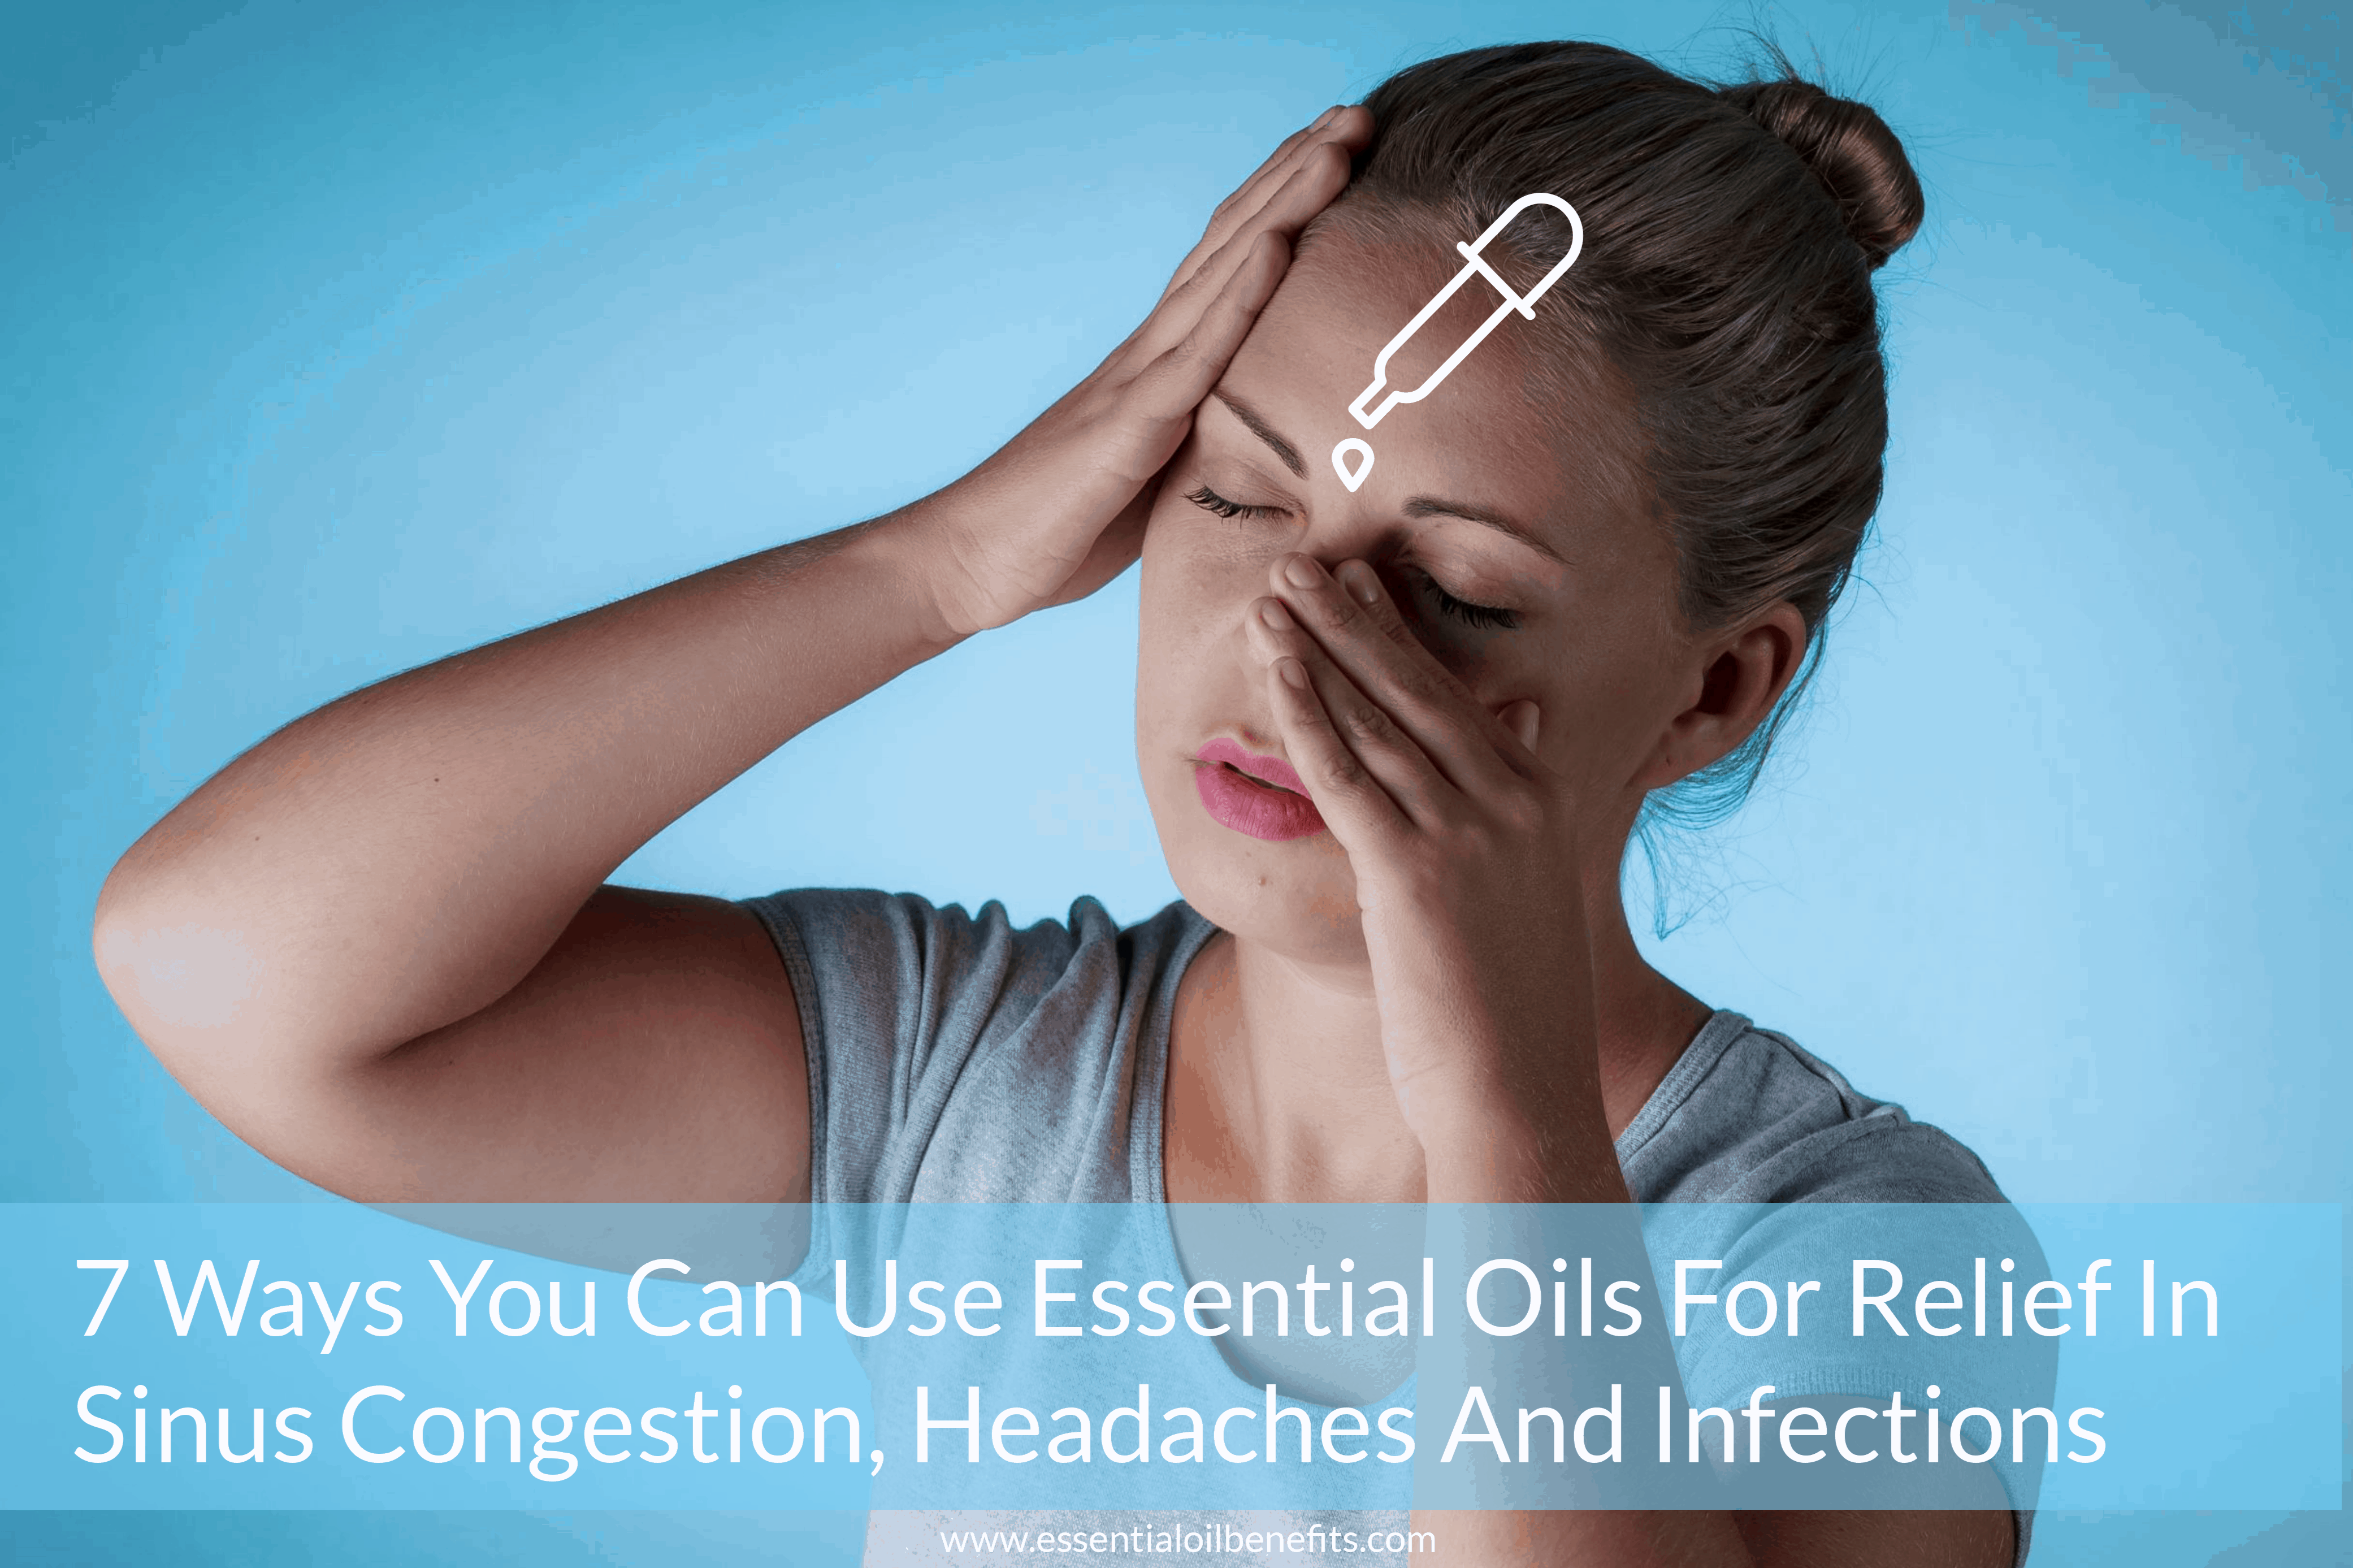 7 ways to use essential oils for sinusitis